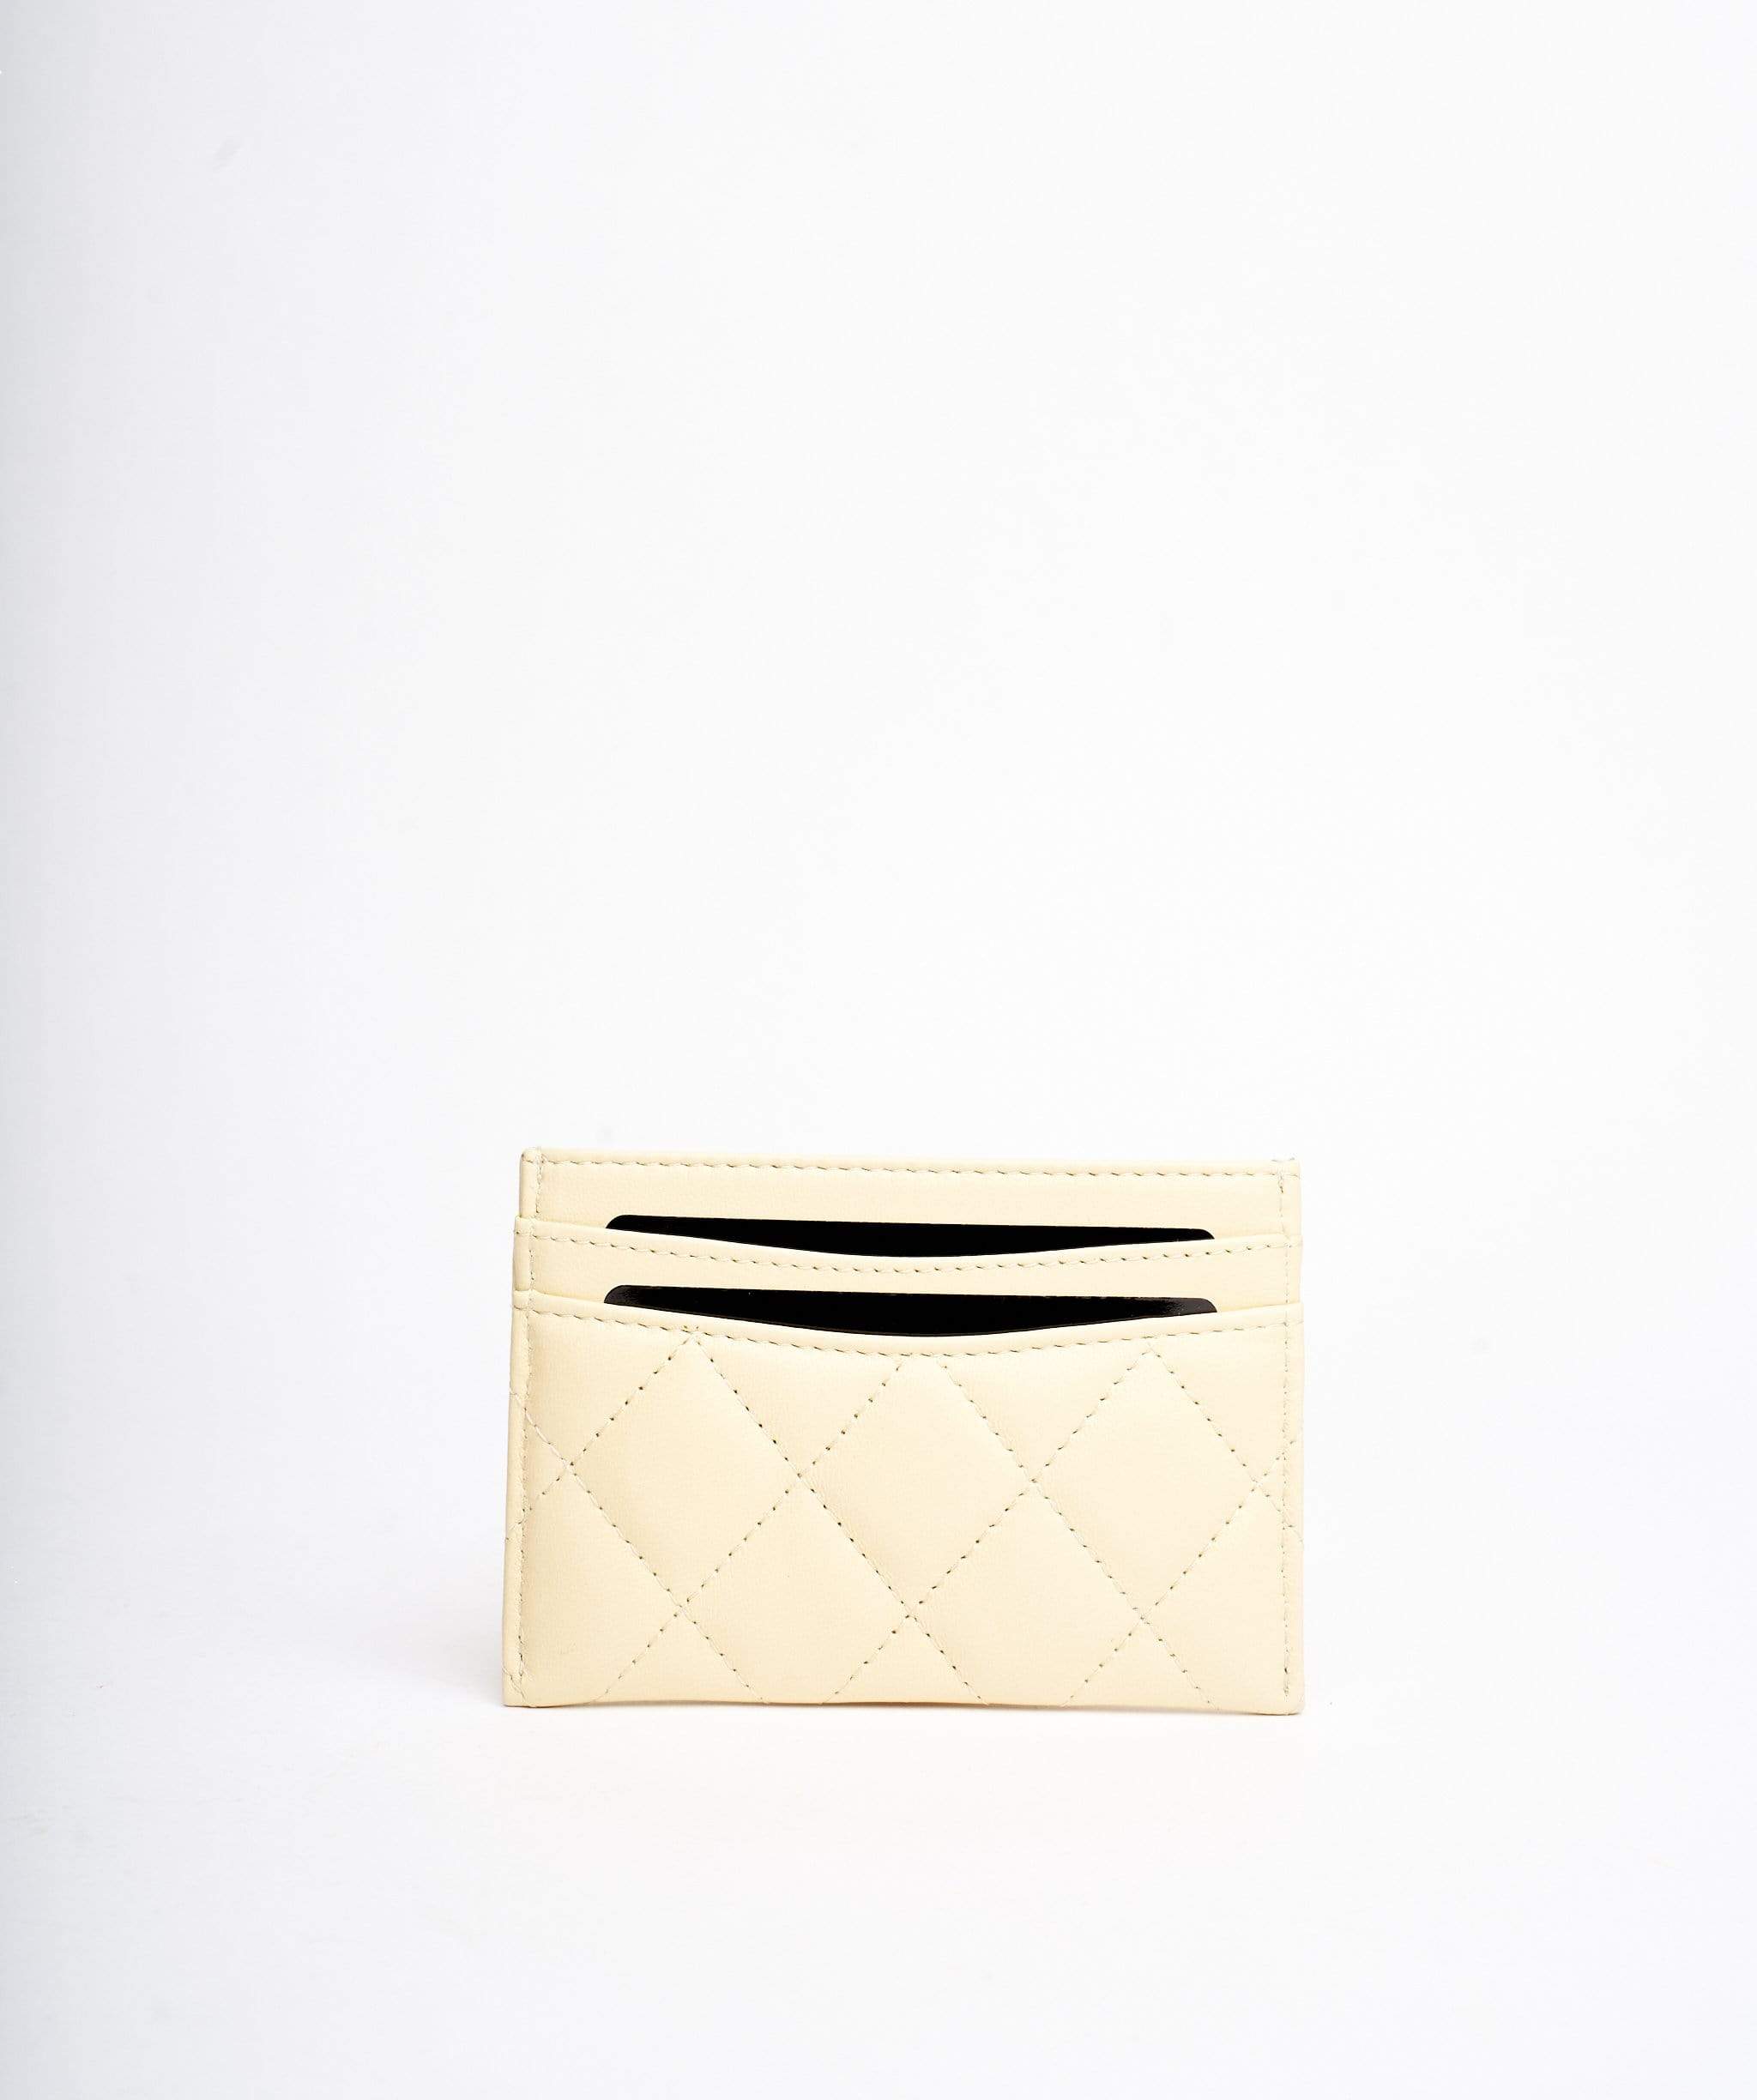 Chanel Chanel quilted card holder in cream